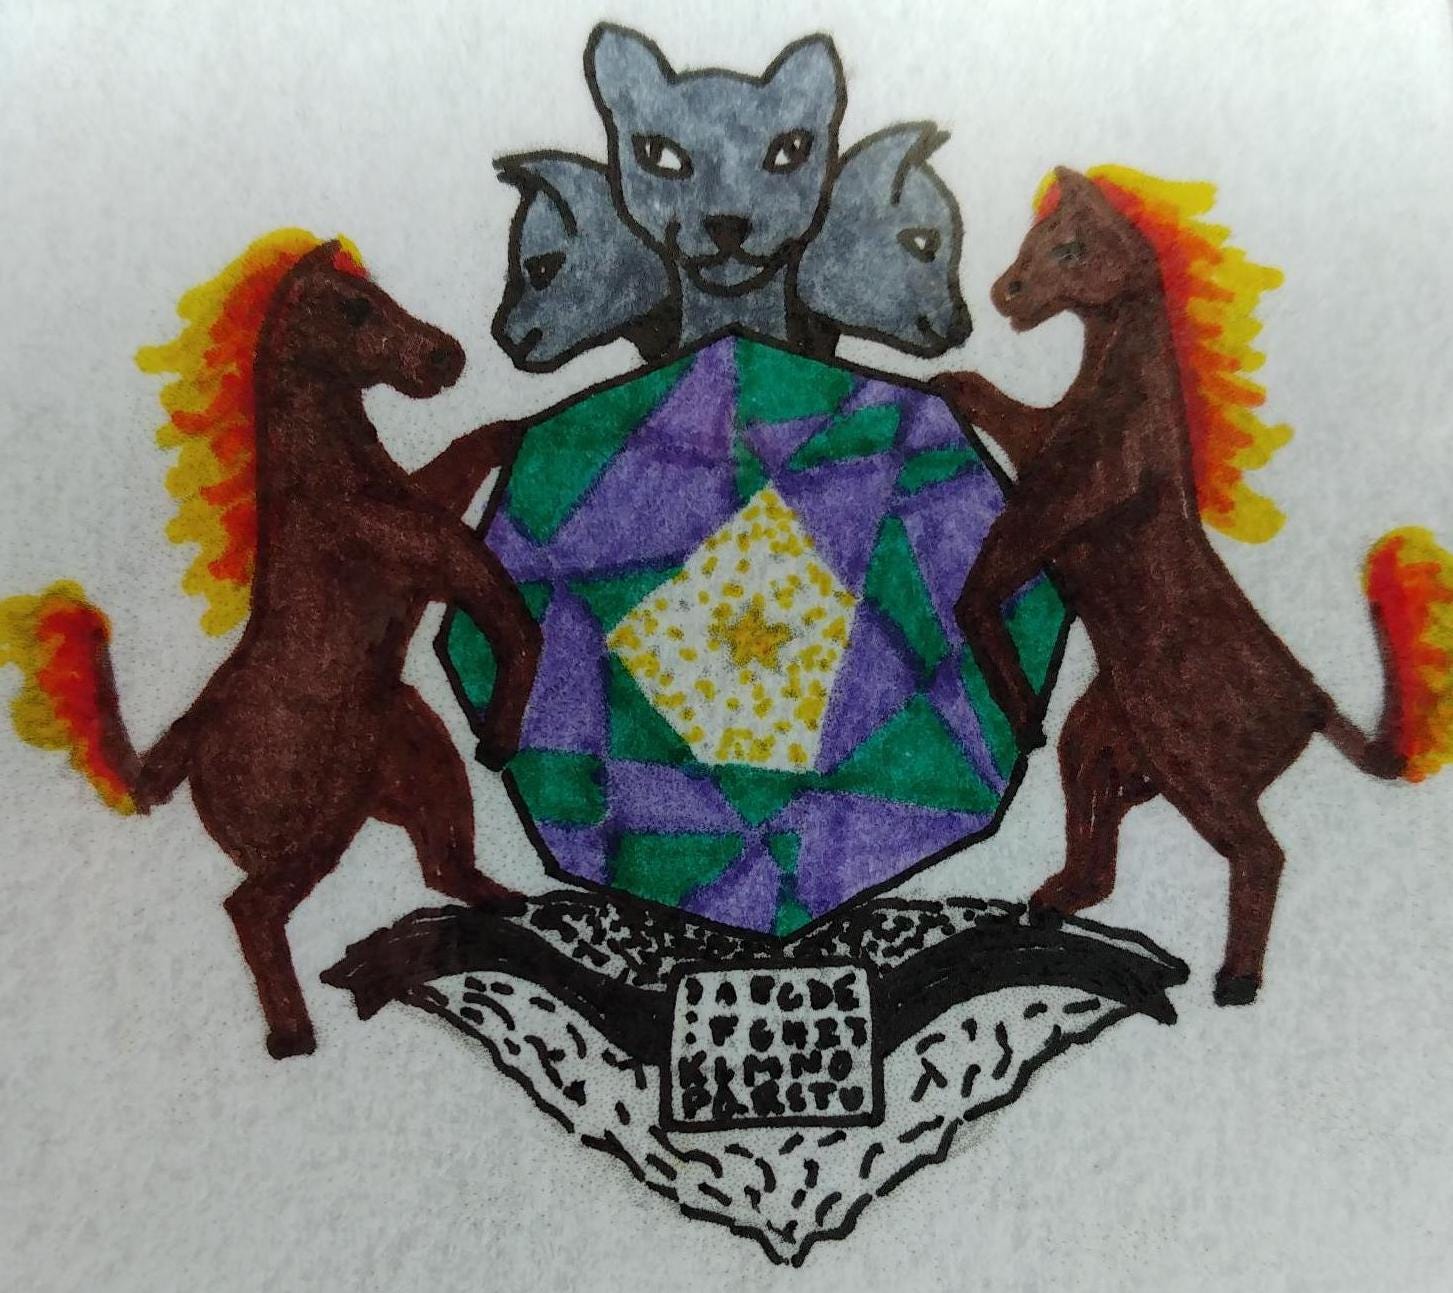 A friendship crest with two flaming horses on either side of a purple and green jewel with a gold center. Rising from the top of the jewel are three blank panther heads. Supporting the jewel at its base is a shell with a letterboard affixed to the front. 